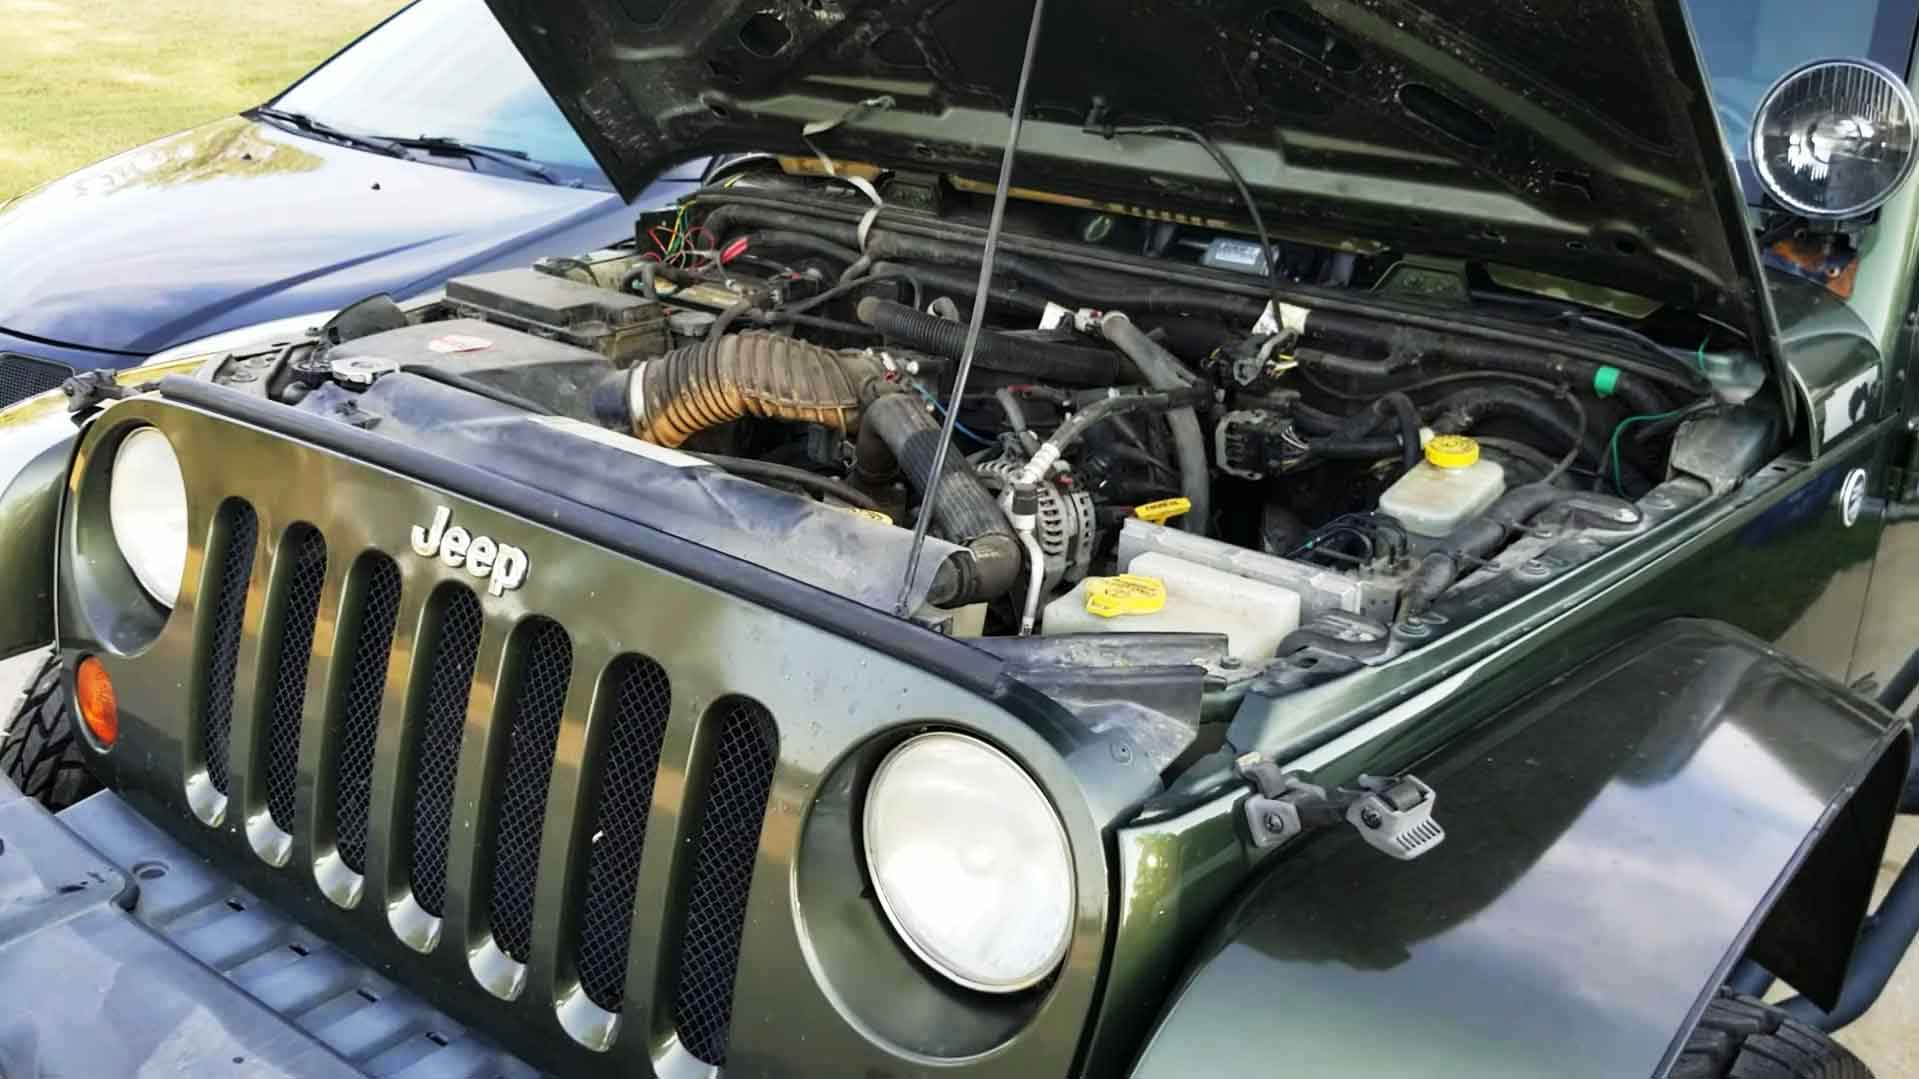 Jeep Won't Start When Hot: What to Do? [Solved] | 2022